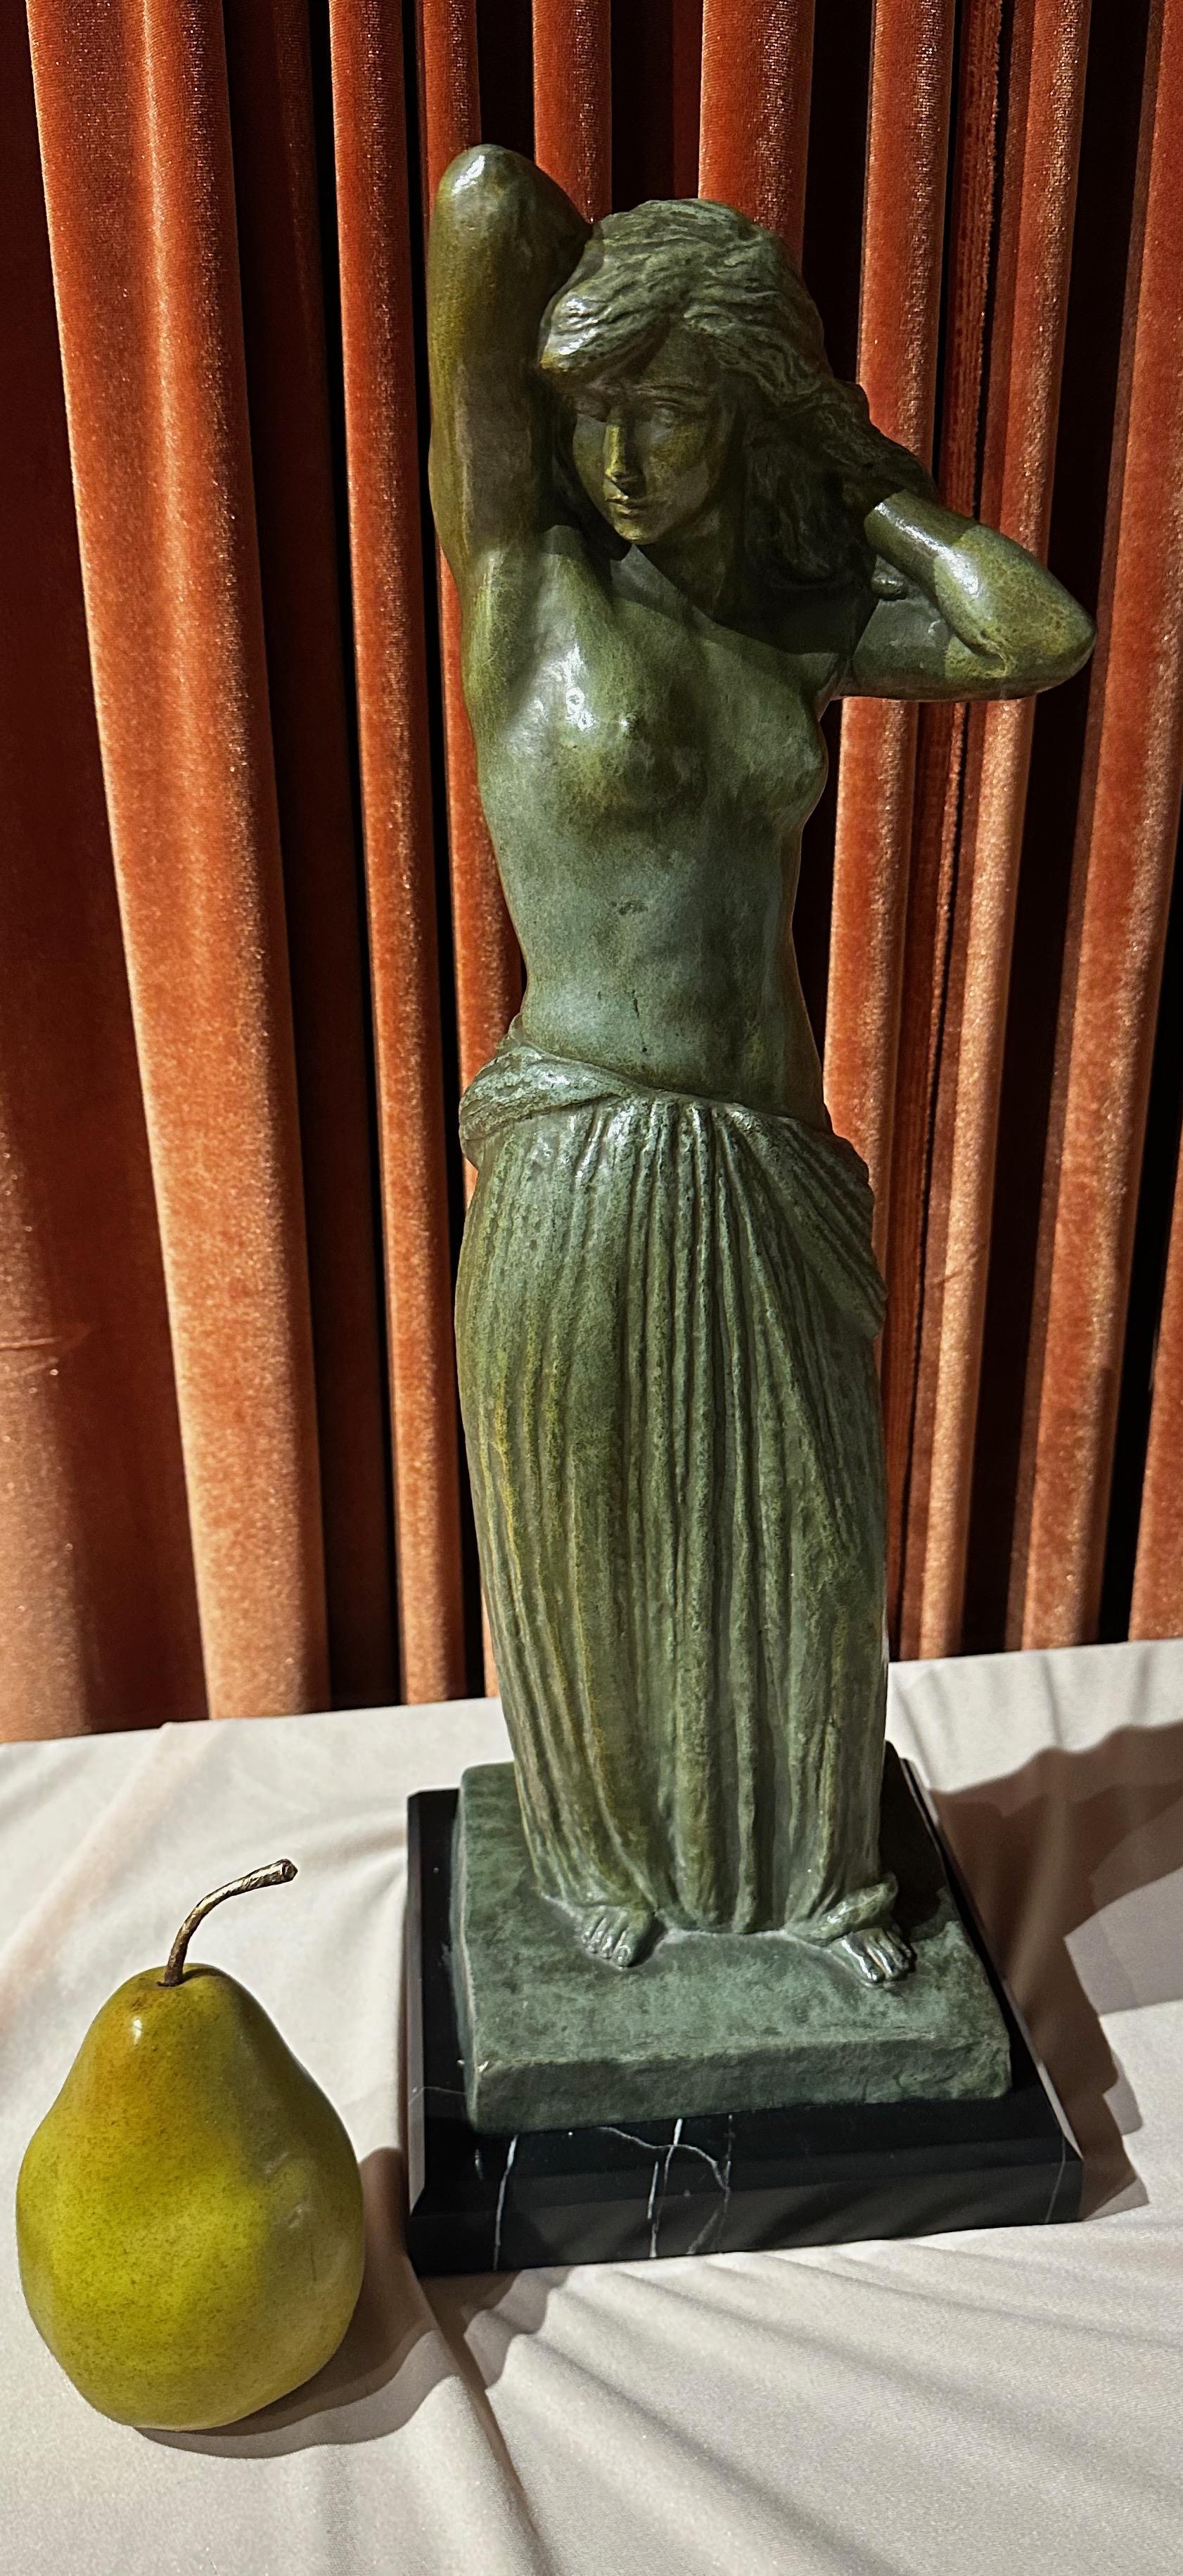 G Gori bronze Female draped nude statue Classic Art Deco made in France. A verdigris green patinated bronze sculpture depicting a bare-breasted female standing with hands behind her head mounted on a marble base. 1925-1930 stylized pose with fine